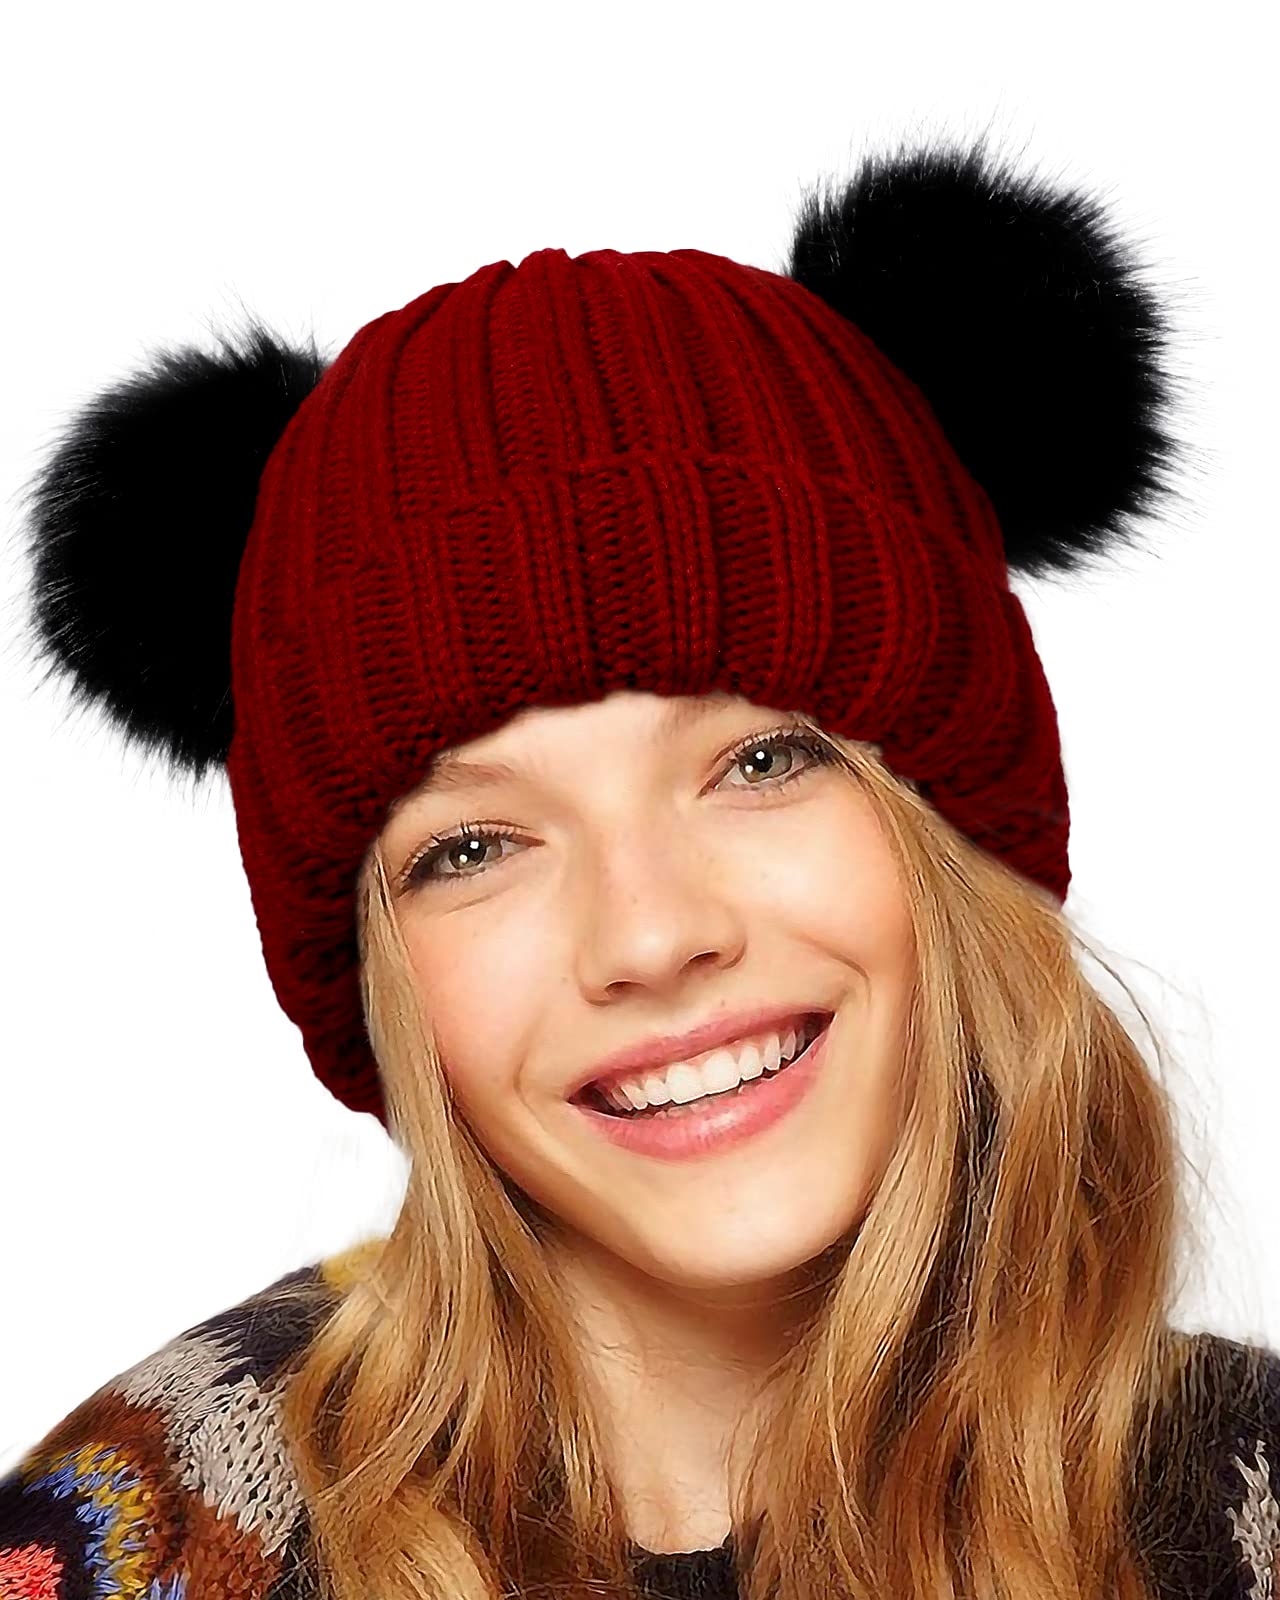 Leopard Beanies with Removable Raccoon Fur Pom-Pom - Winter Warm Long Knit Thick Ribbed Cuffed Soft Ladies Beanie Hat (Latte) - 5328